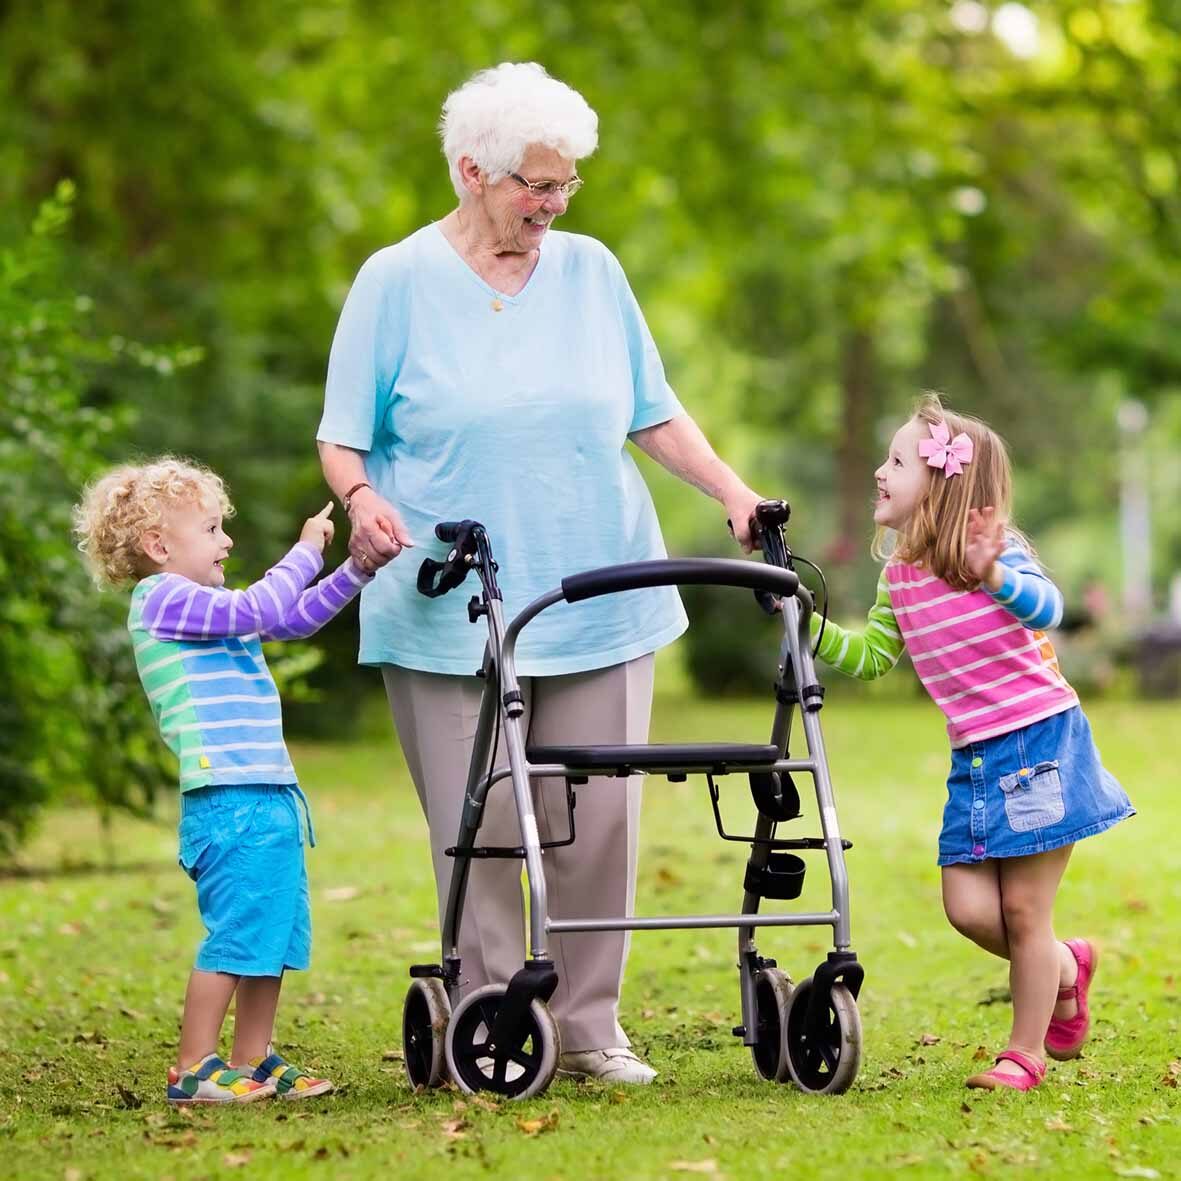 An elderly woman using a walking aid smiling with two children